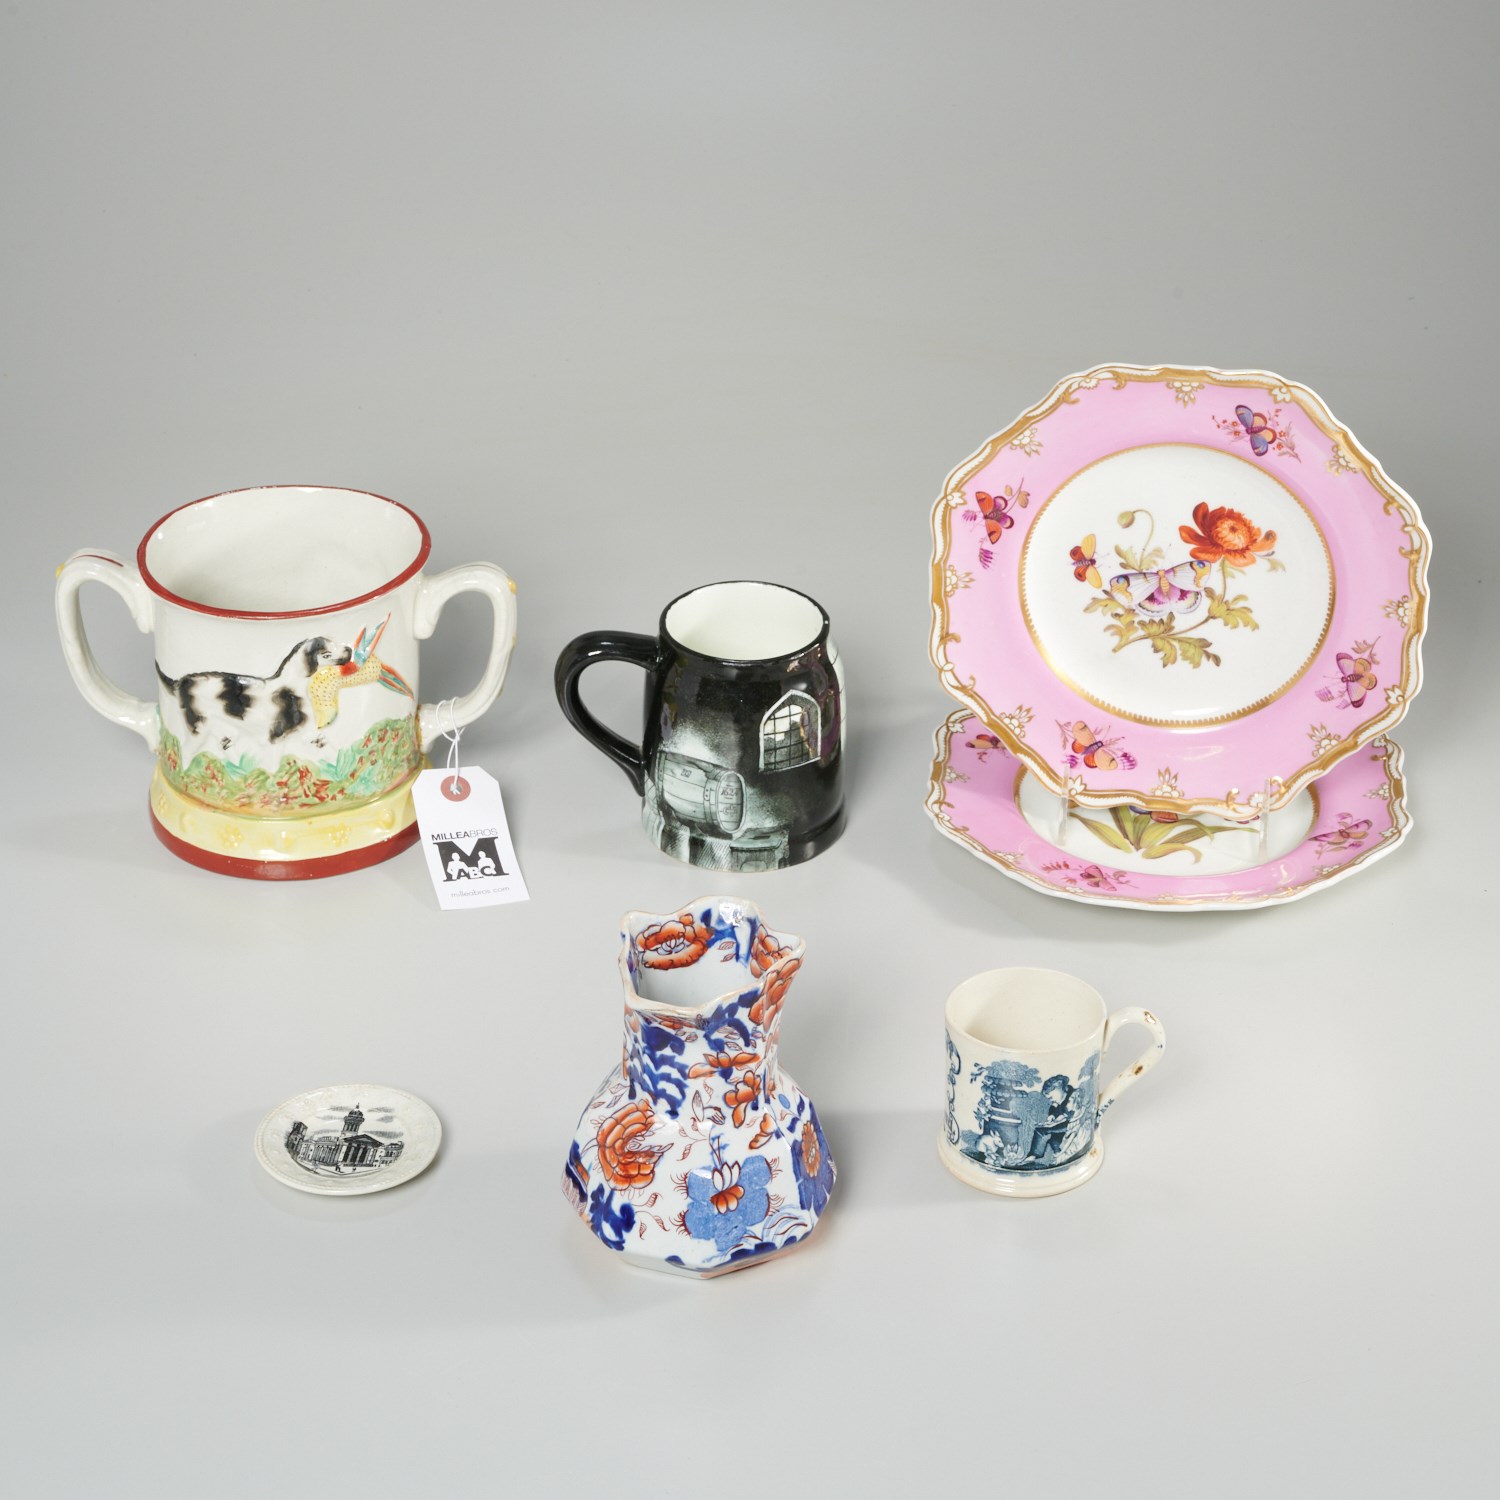 GROUP OF ENGLISH CERAMIC WARE 19th/20th